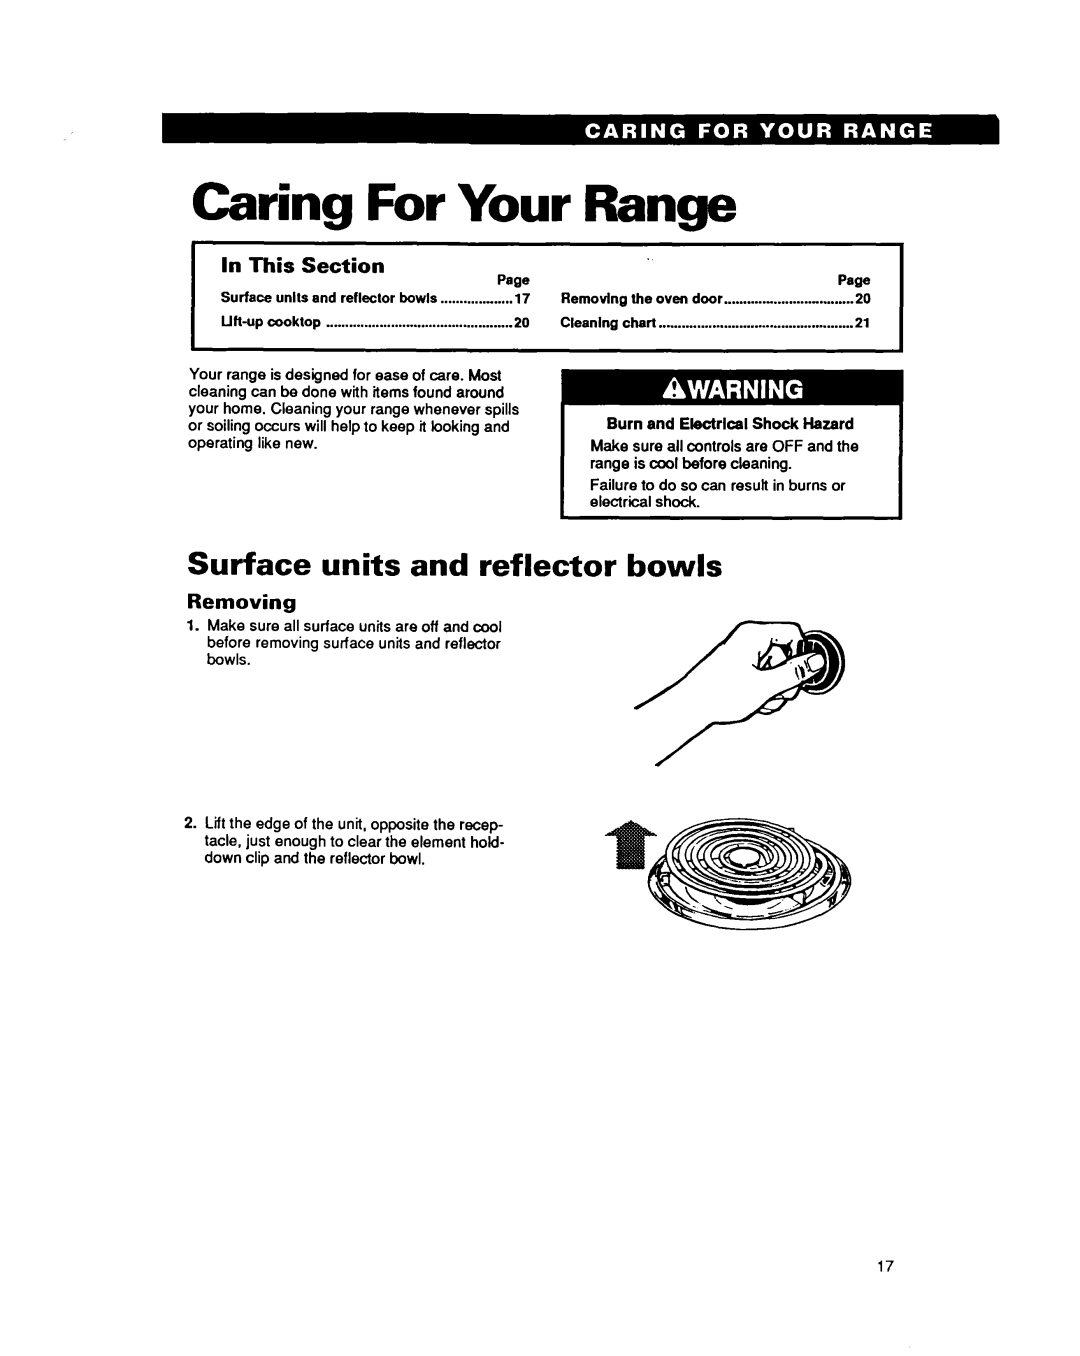 Whirlpool RF302BXY, RF3020XY Caring For Your Range, Surface units and reflector bowls, This, Removing, Section 